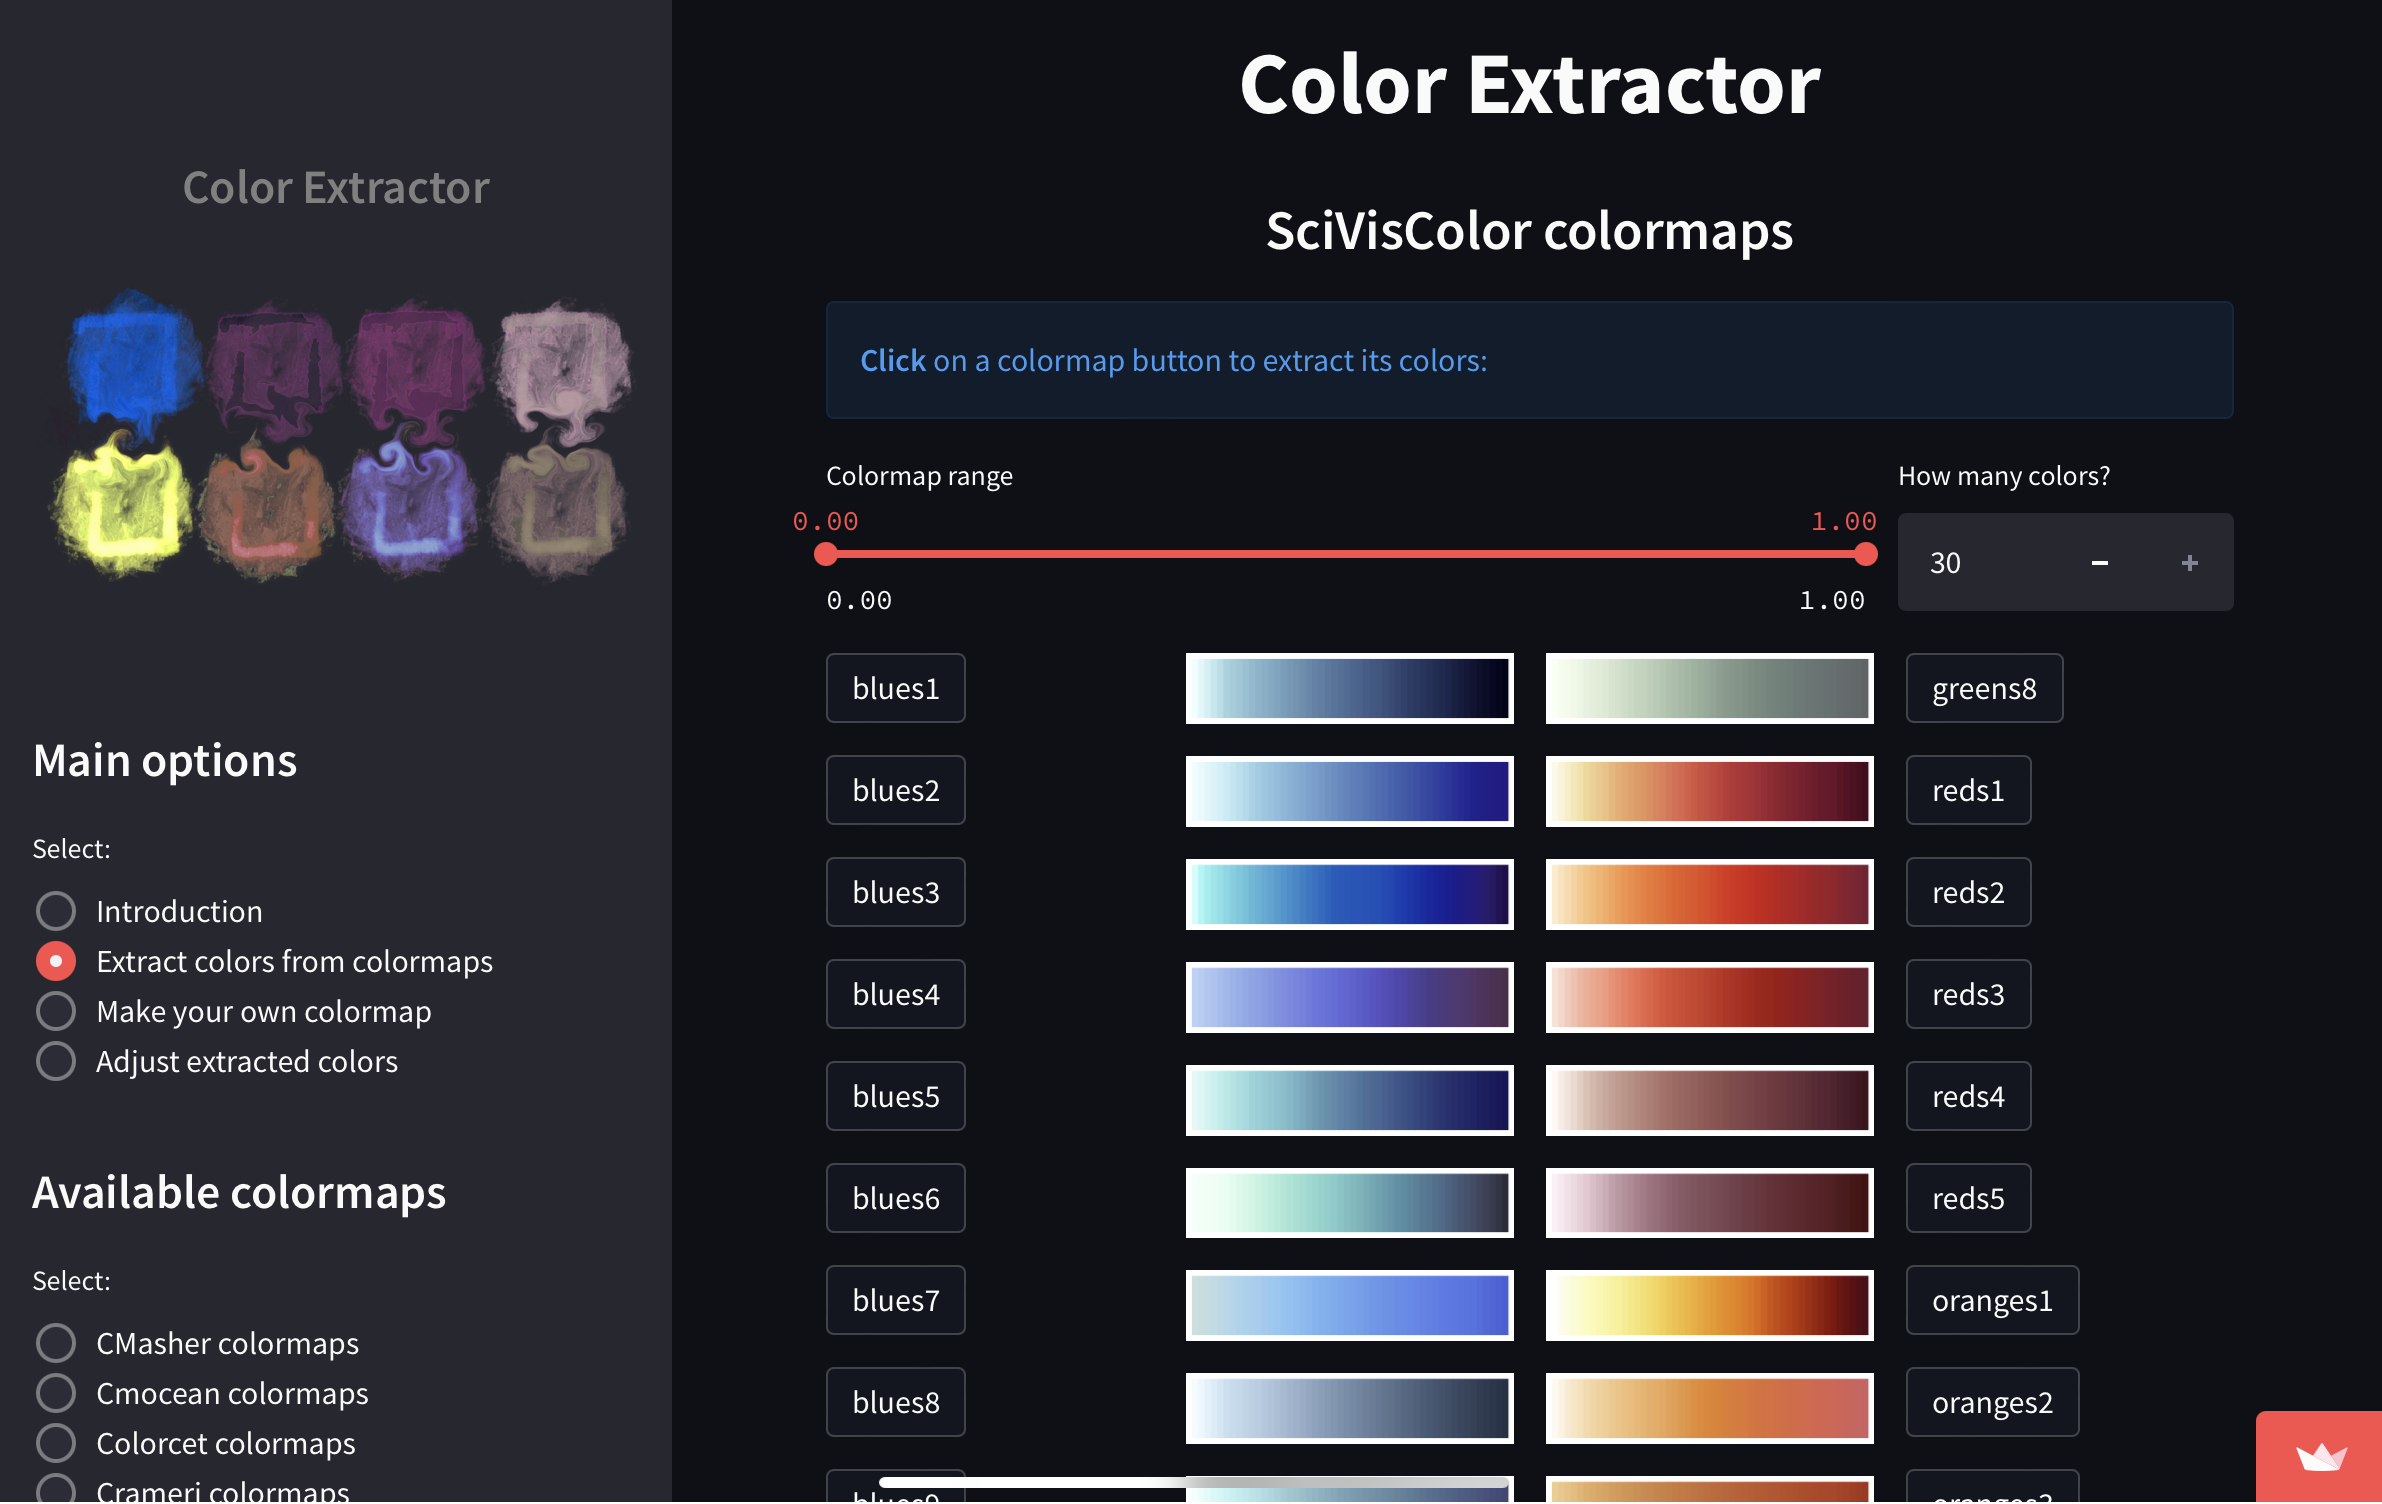 Sample of colormaps from app.